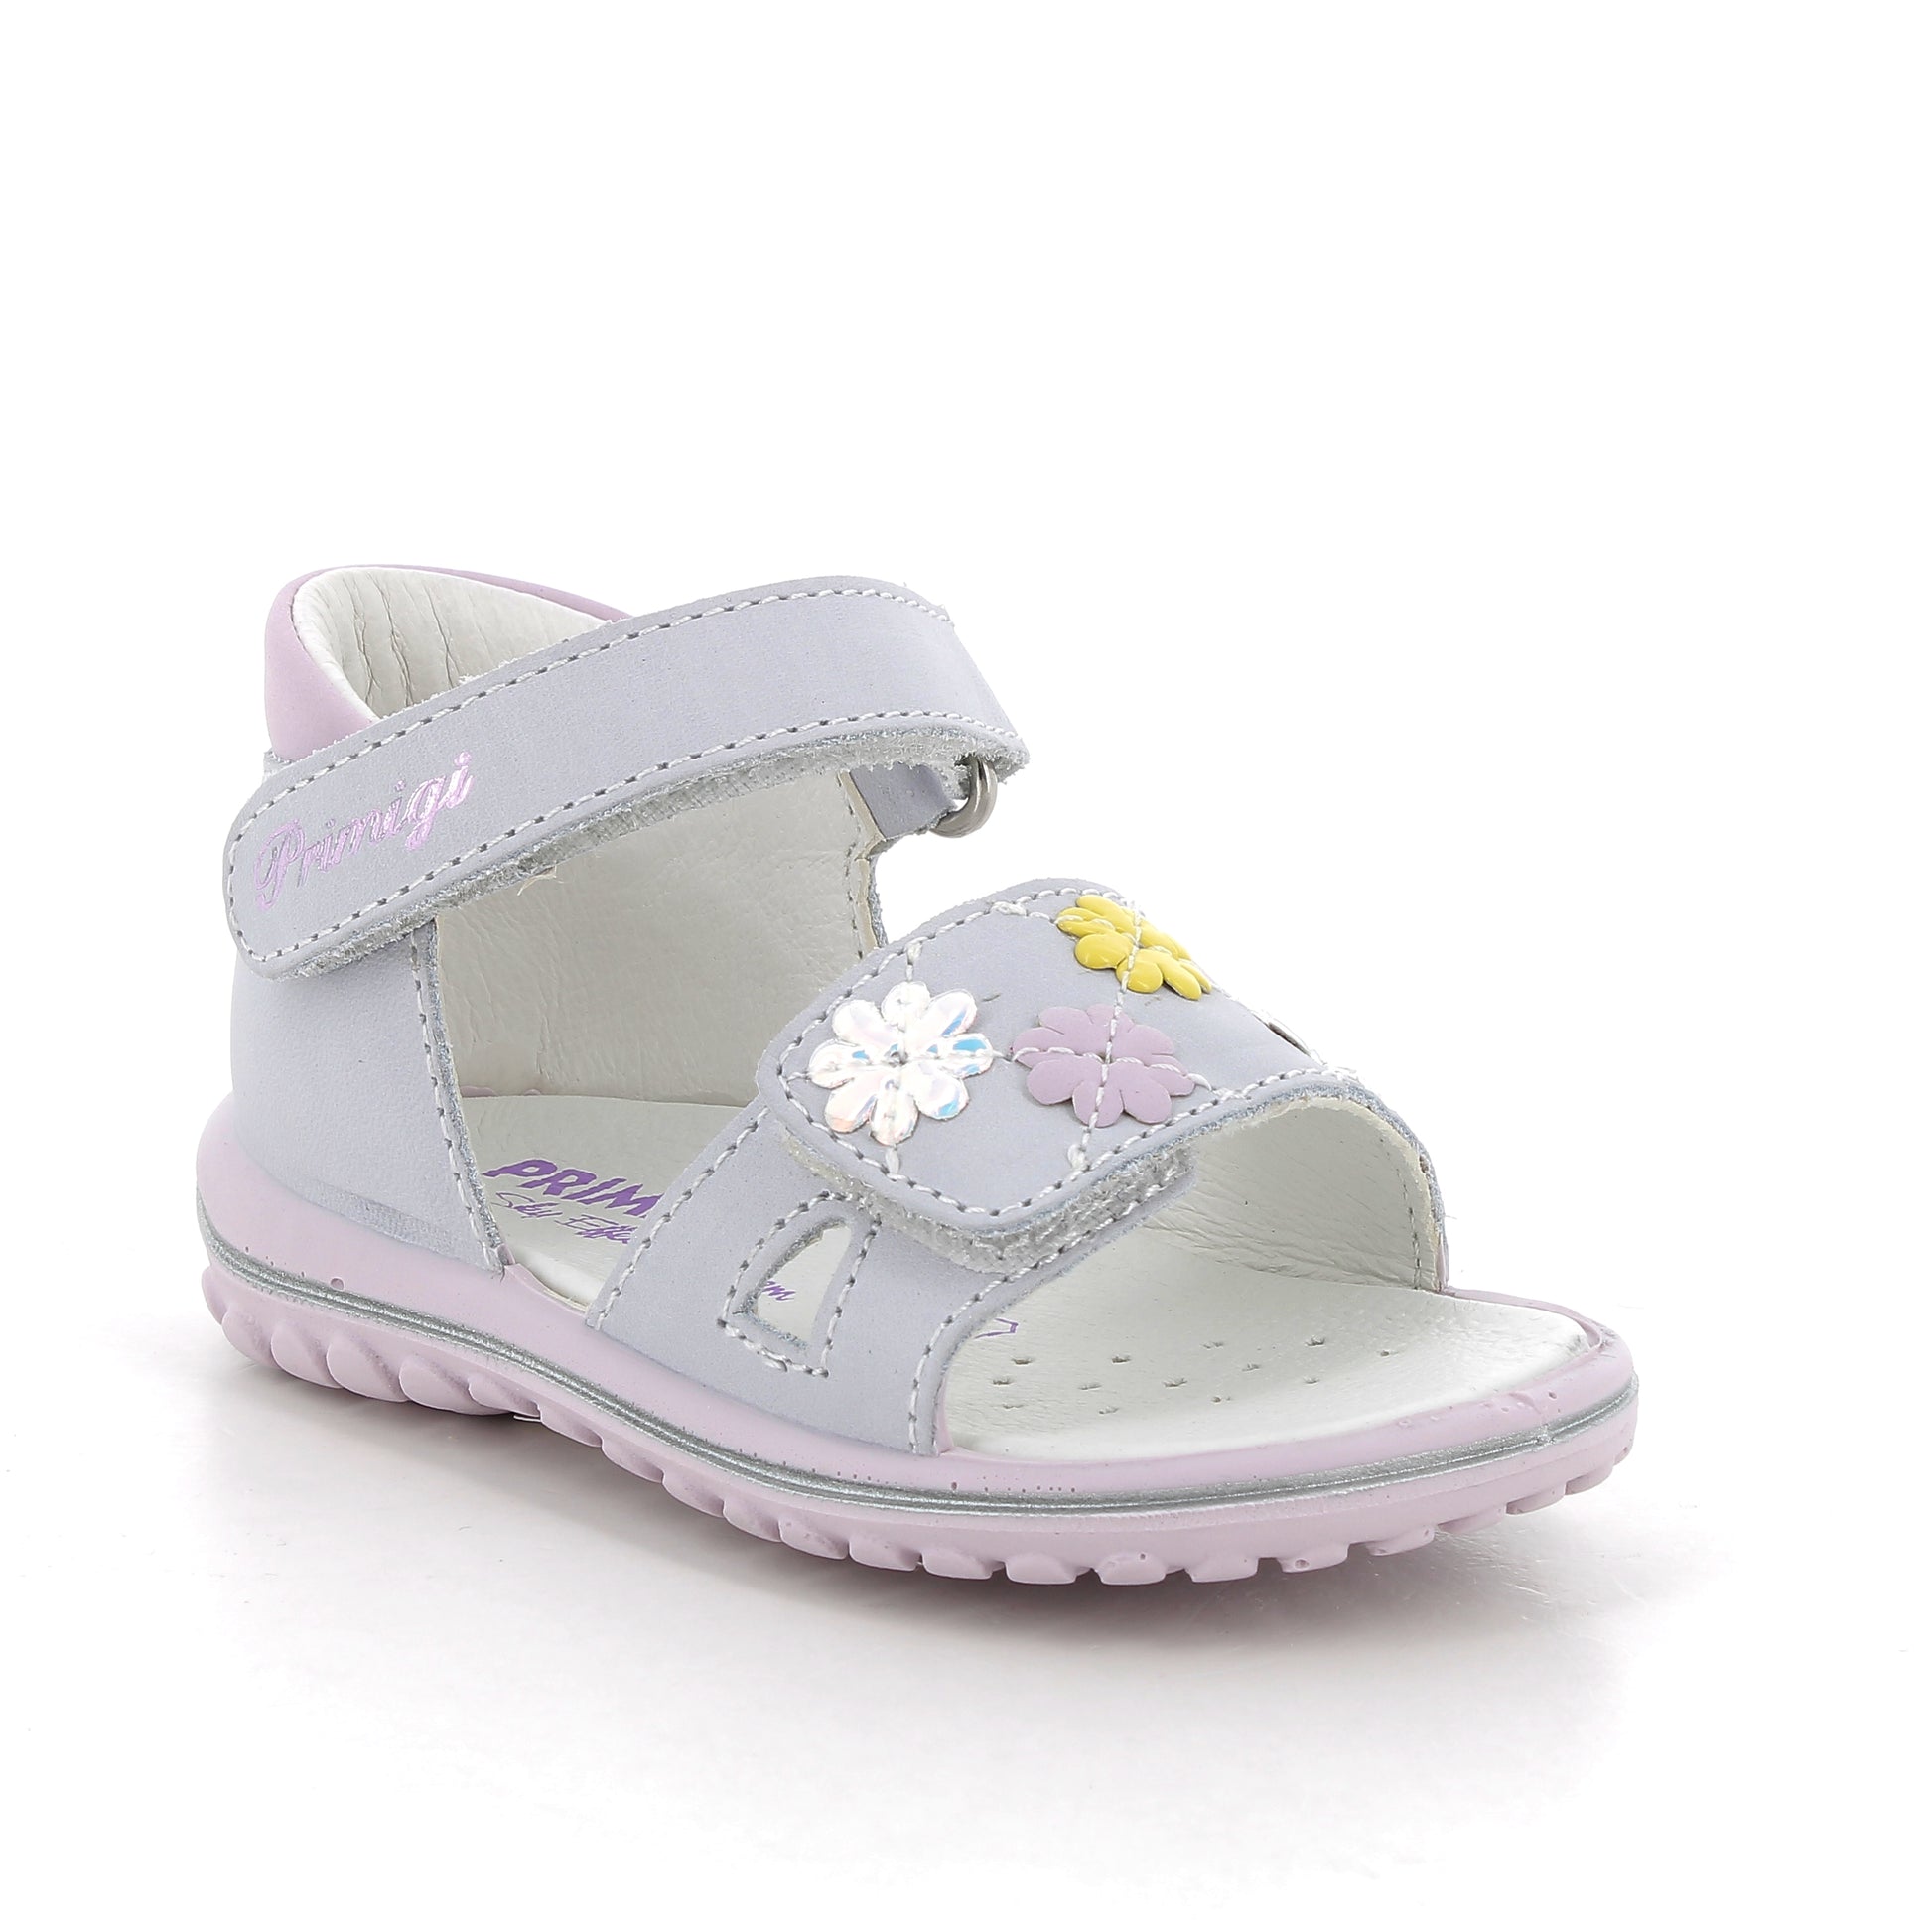 A girls sandal by Primigi, style Baby Sweet 586522, in grey leather with multi coloured flower trim. Angled view.